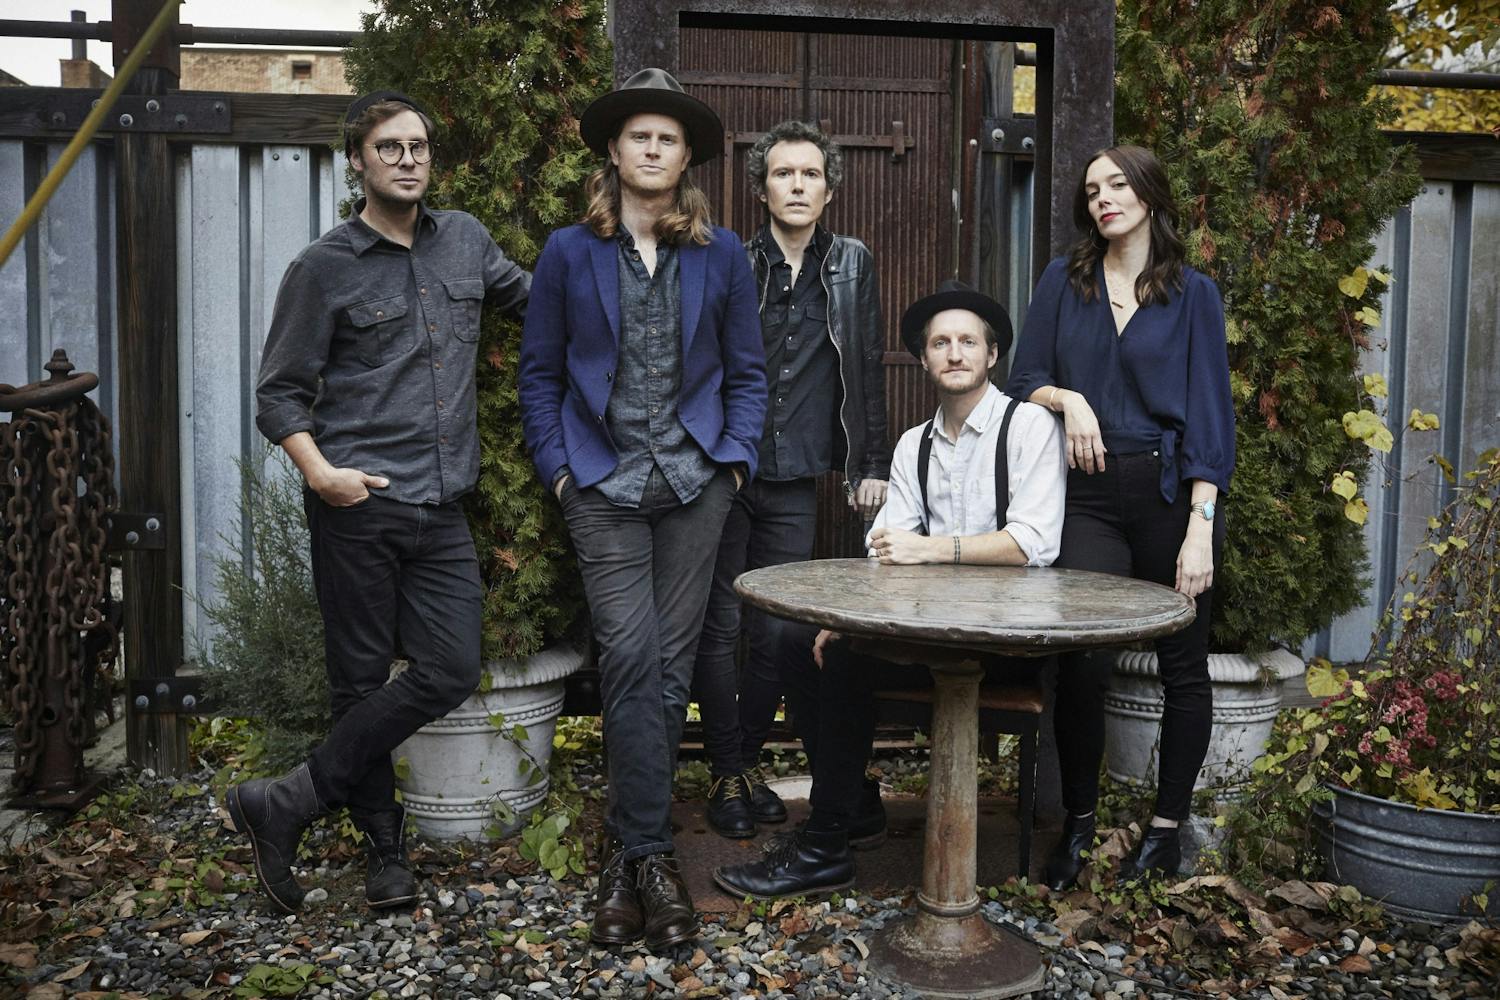 Jeremiah Fraites, co-founder and drummer of The Lumineers, spoke to The Spectrum ahead of their Feb. 26 show at KeyBank Center.